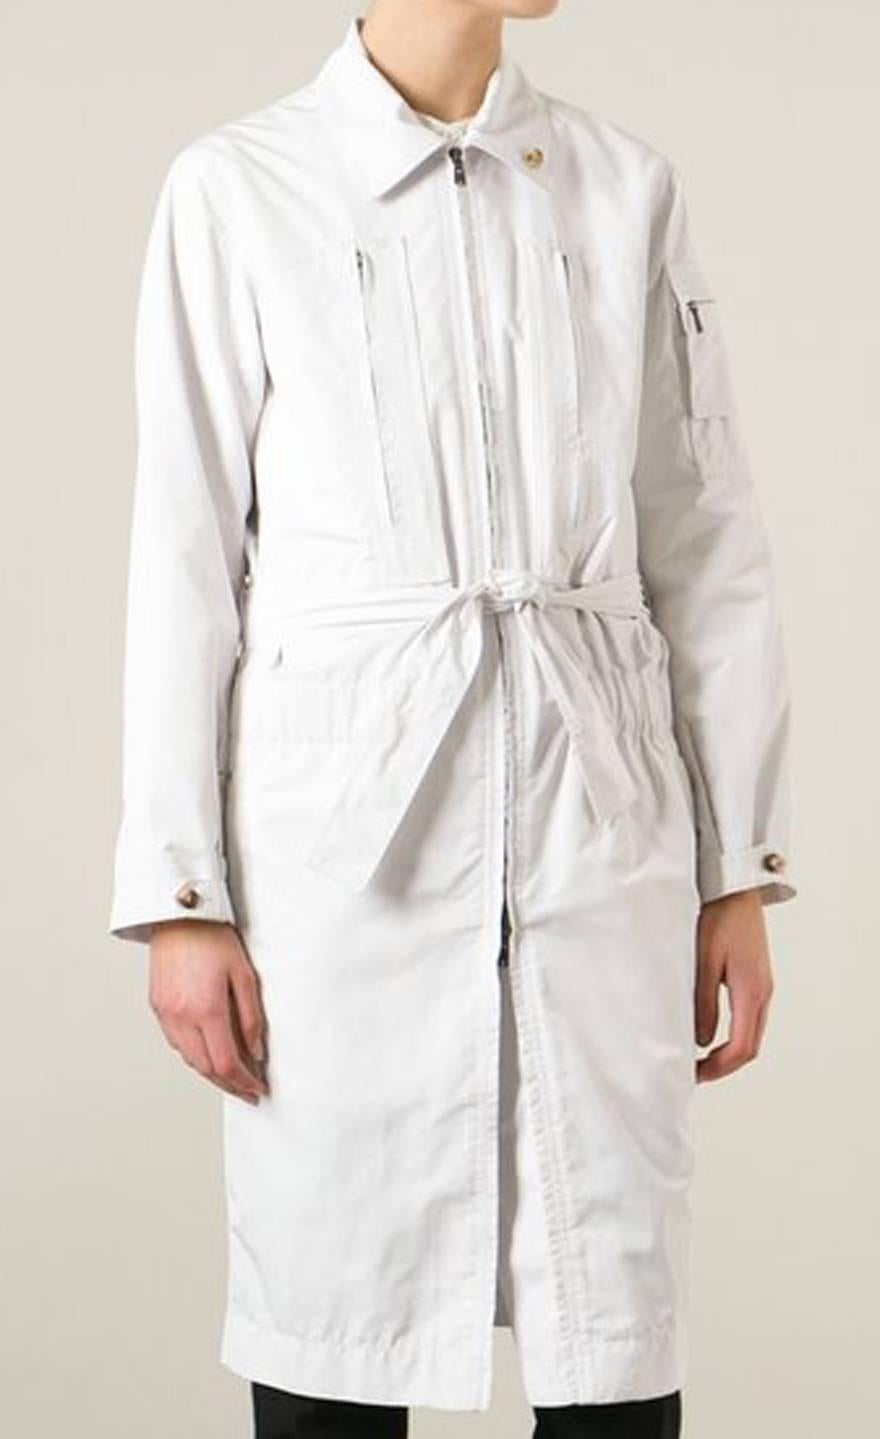 White Saint Laurent trench coat  featuring a center front zip opening, a classic collar, long sleeves, an elasticated waistband, a belted waist, side zipped pockets and a mid-length.
In excellent vintage condition. Made in France. 100%